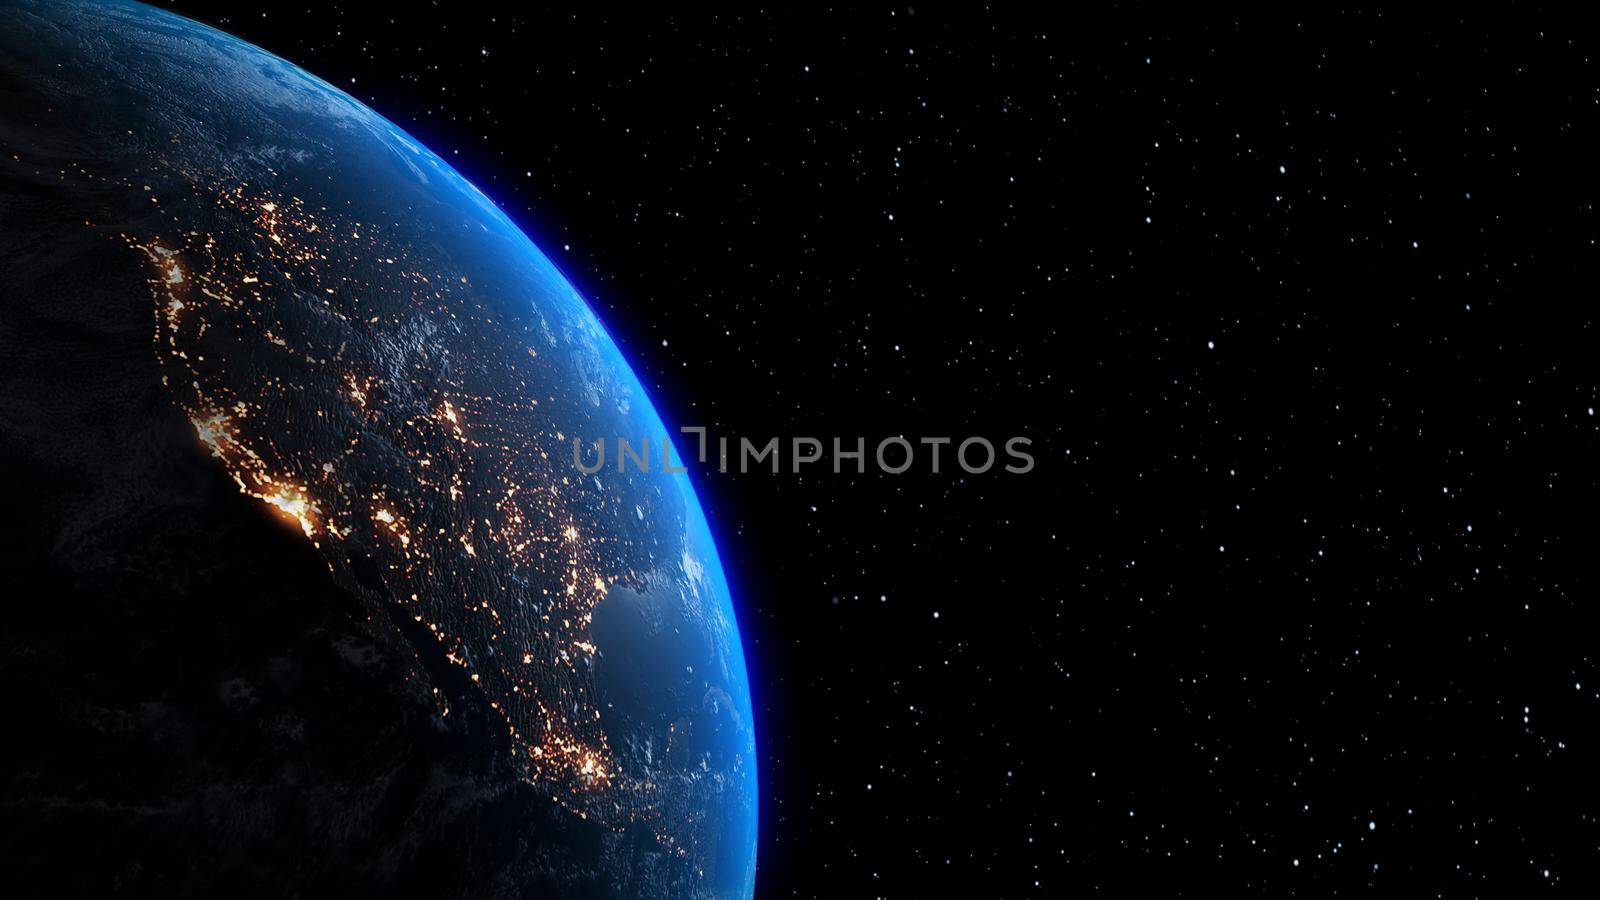 Planet earth with realistic geography surface and orbital 3D cloud atmosphere . Outer space view of world globe sphere of continents . 3D rendering graphic . Elements of this image furnished by NASA .